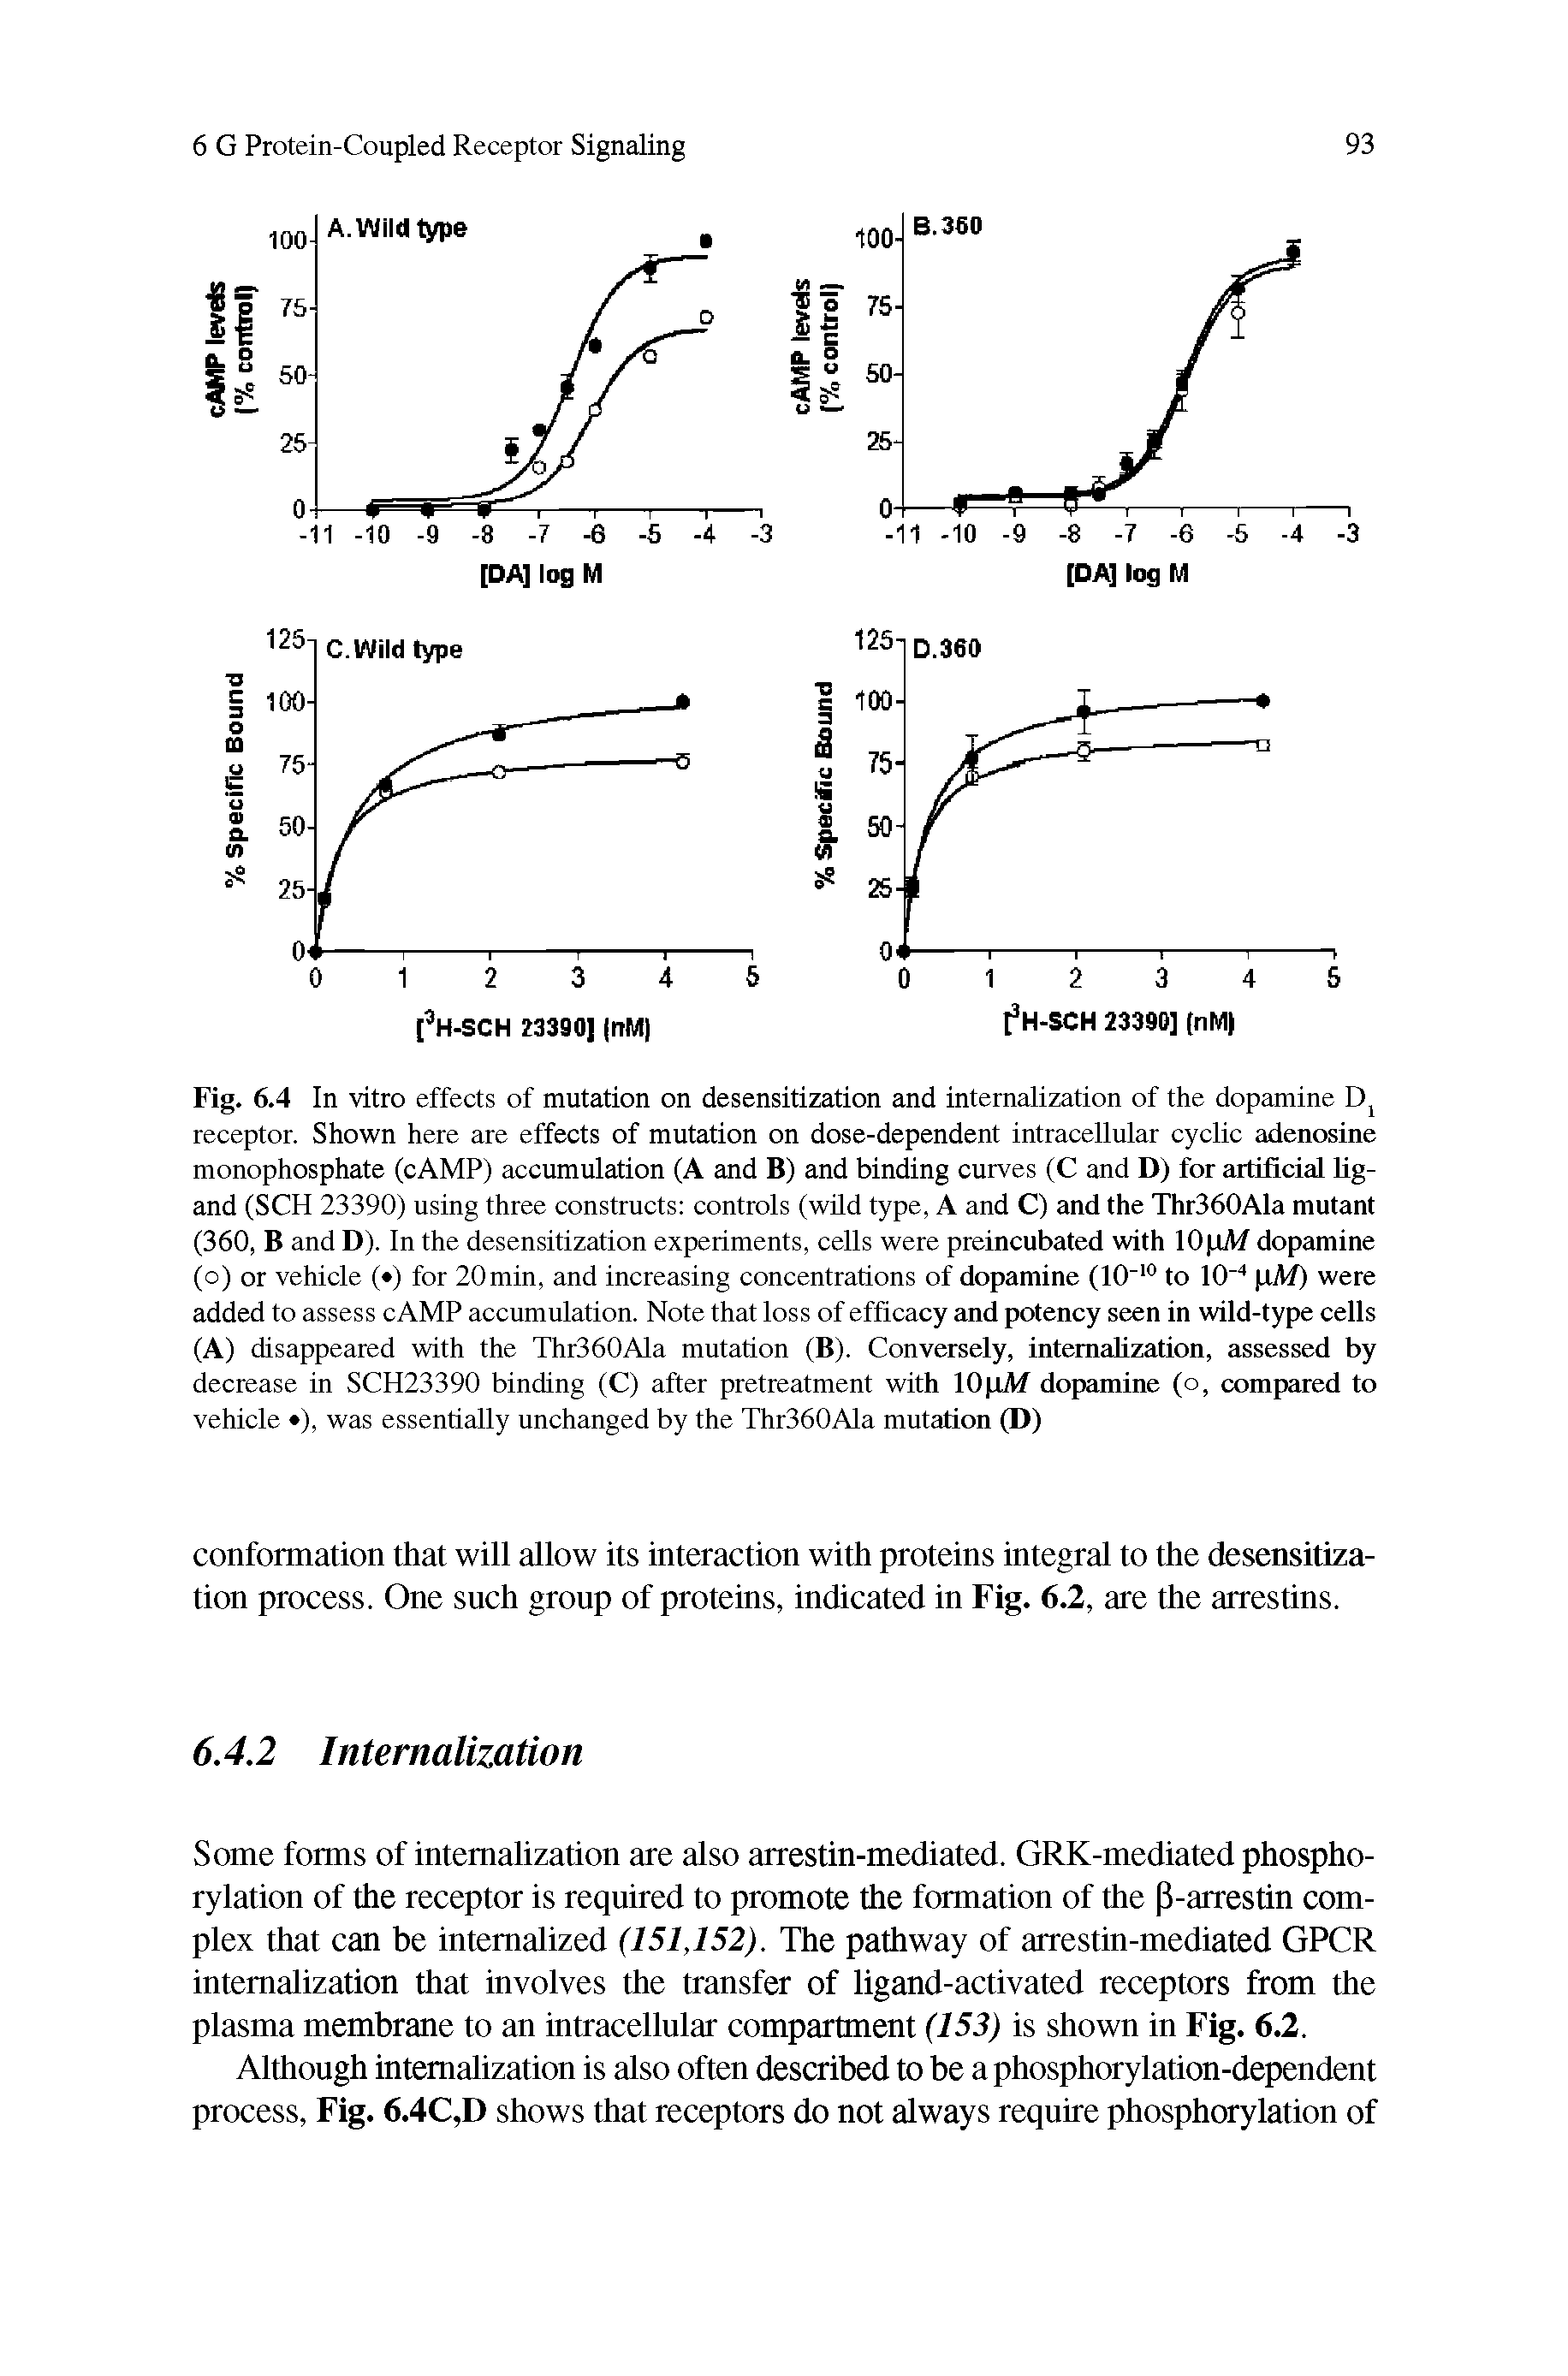 Fig. 6.4 In vitro effects of mutation on desensitization and internalization of the dopamine receptor. Shown here are effects of mutation on dose-dependent intracellular cyclic adenosine monophosphate (cAMP) accumulation (A and B) and binding curves (C and D) for artificial ligand (SCH 23390) using three constructs controls (wild type, A and C) and the Thr360Ala mutant (360, B and D). In the desensitization experiments, cells were preincubated with 10 oA/ dopamine (o) or vehicle ( ) for 20min, and increasing concentrations of dopamine (10 to 10 (iM) were added to assess cAMP accumulation. Note that loss of efficacy and potency seen in wild-type cells (A) disappeared with the Thr360Ala mutation (B). Conversely, internalization, assessed by decrease in SCH23390 binding (C) after pretreatment with lOpM dopamine (o, compared to vehicle ), was essentially unchanged by the Thr360Ala mutation (D)...